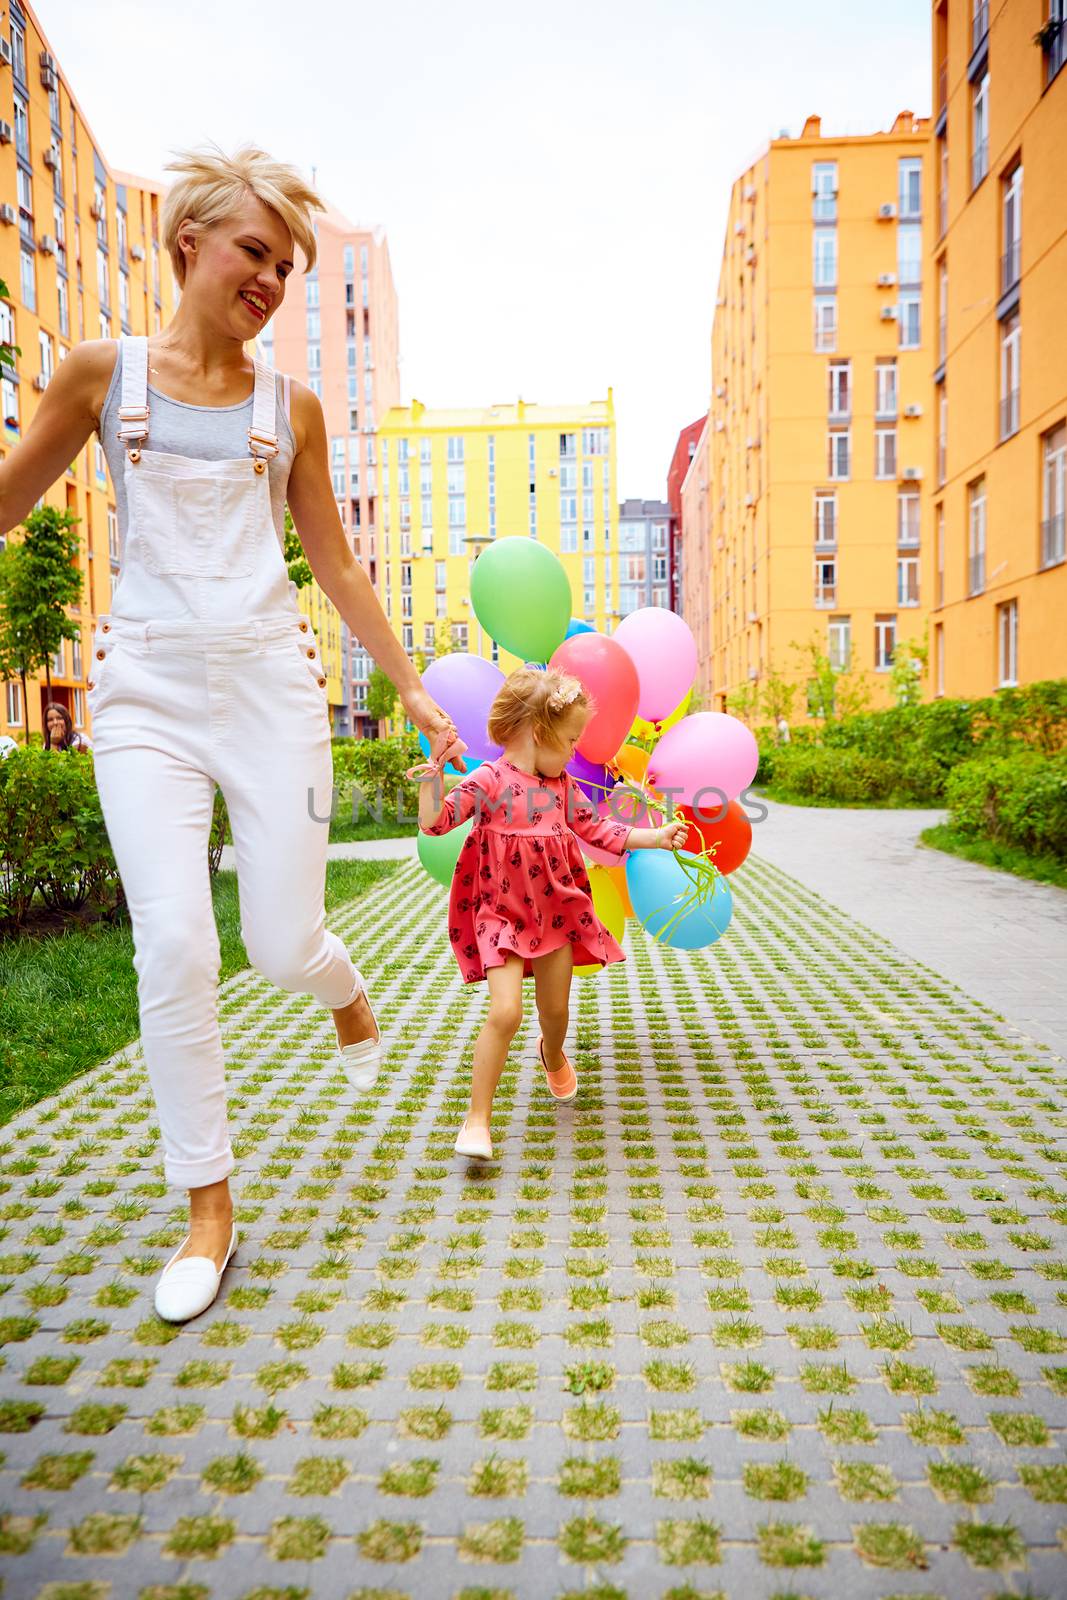 summer holidays, celebration, family, children and people concept - mother and child with colorful balloons